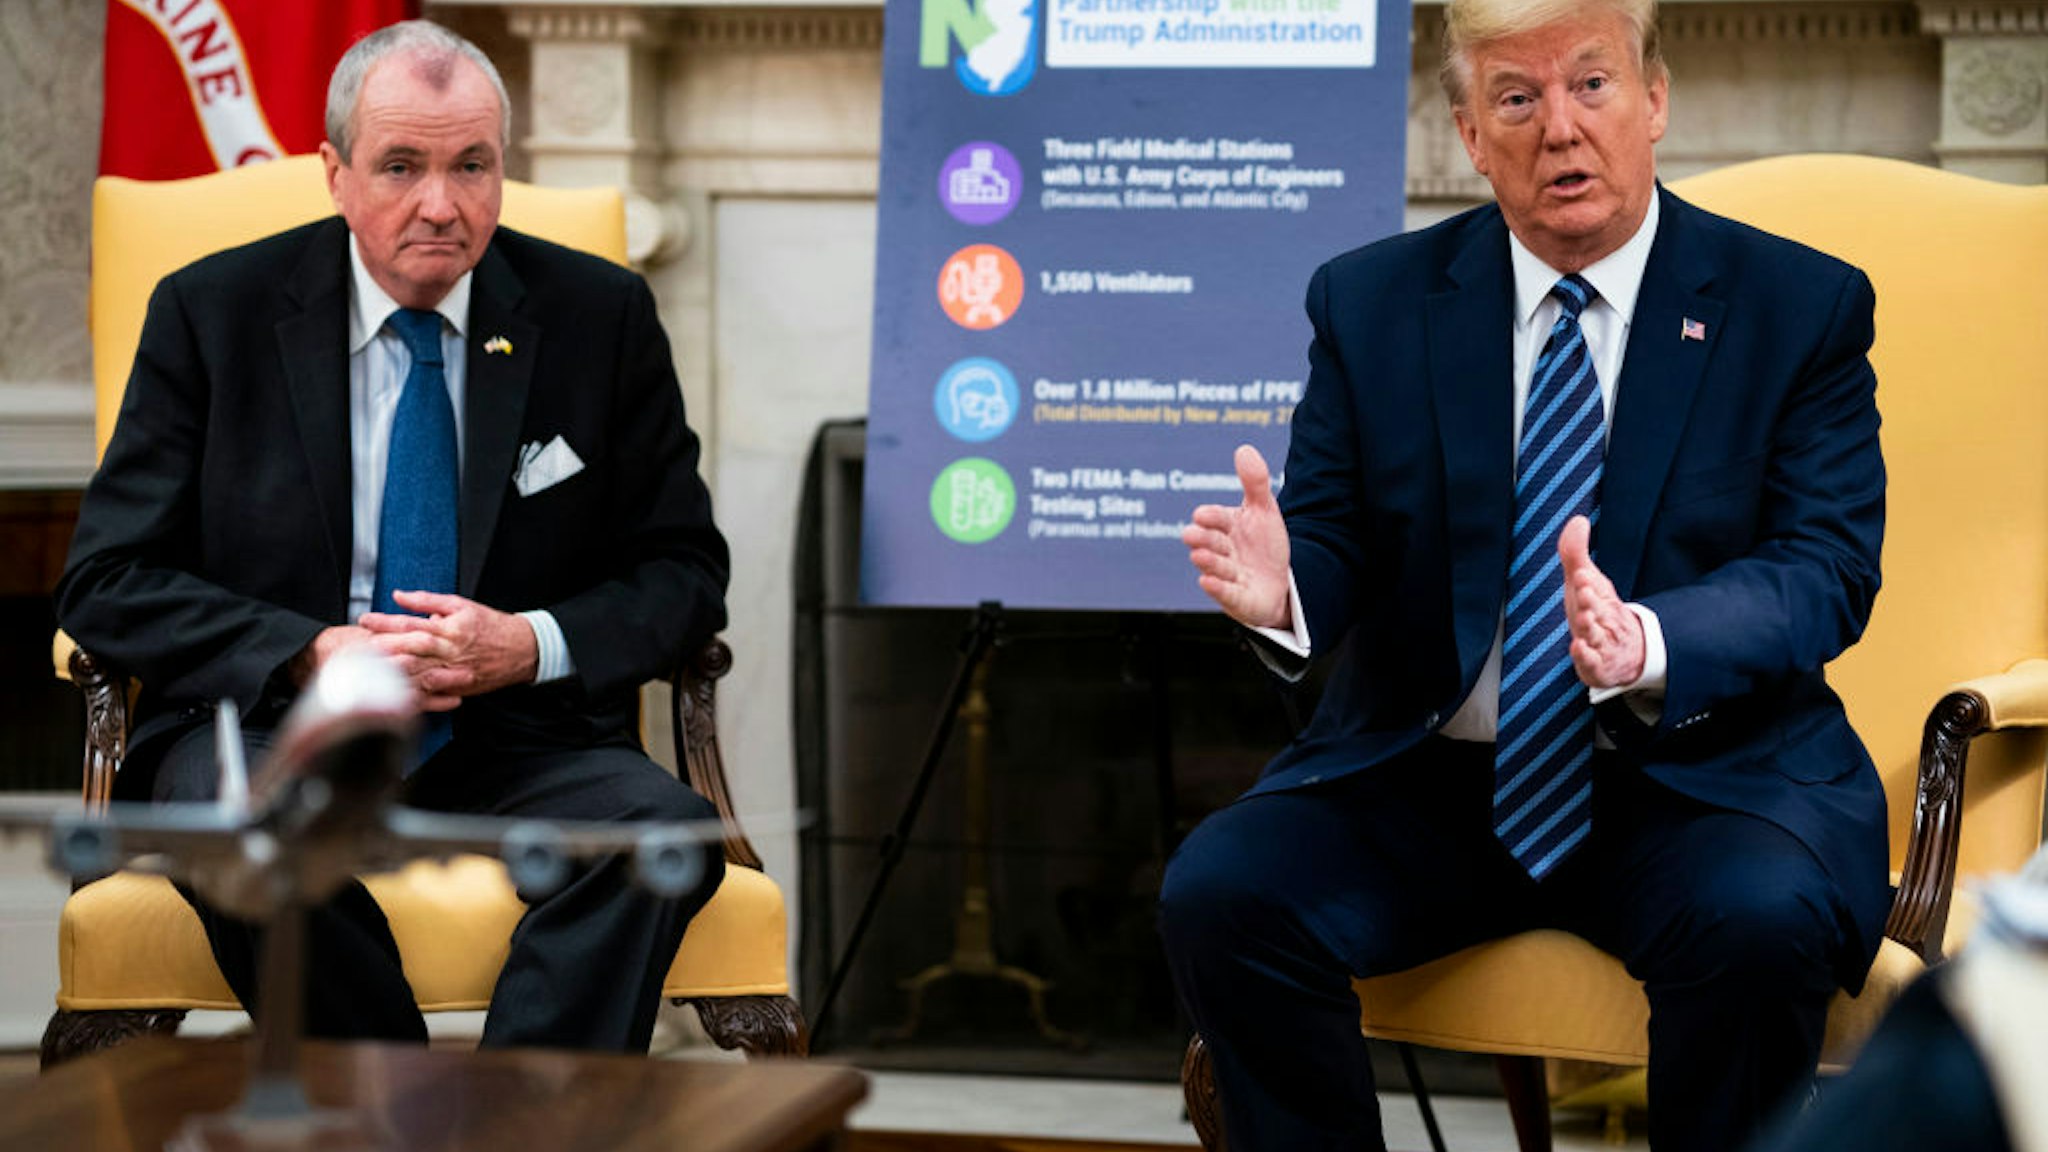 U.S. President Donald Trump meets with New Jersey Gov. Phil Murphy (L) in the Oval Office of the White House April 30, 2020 in Washington, DC.